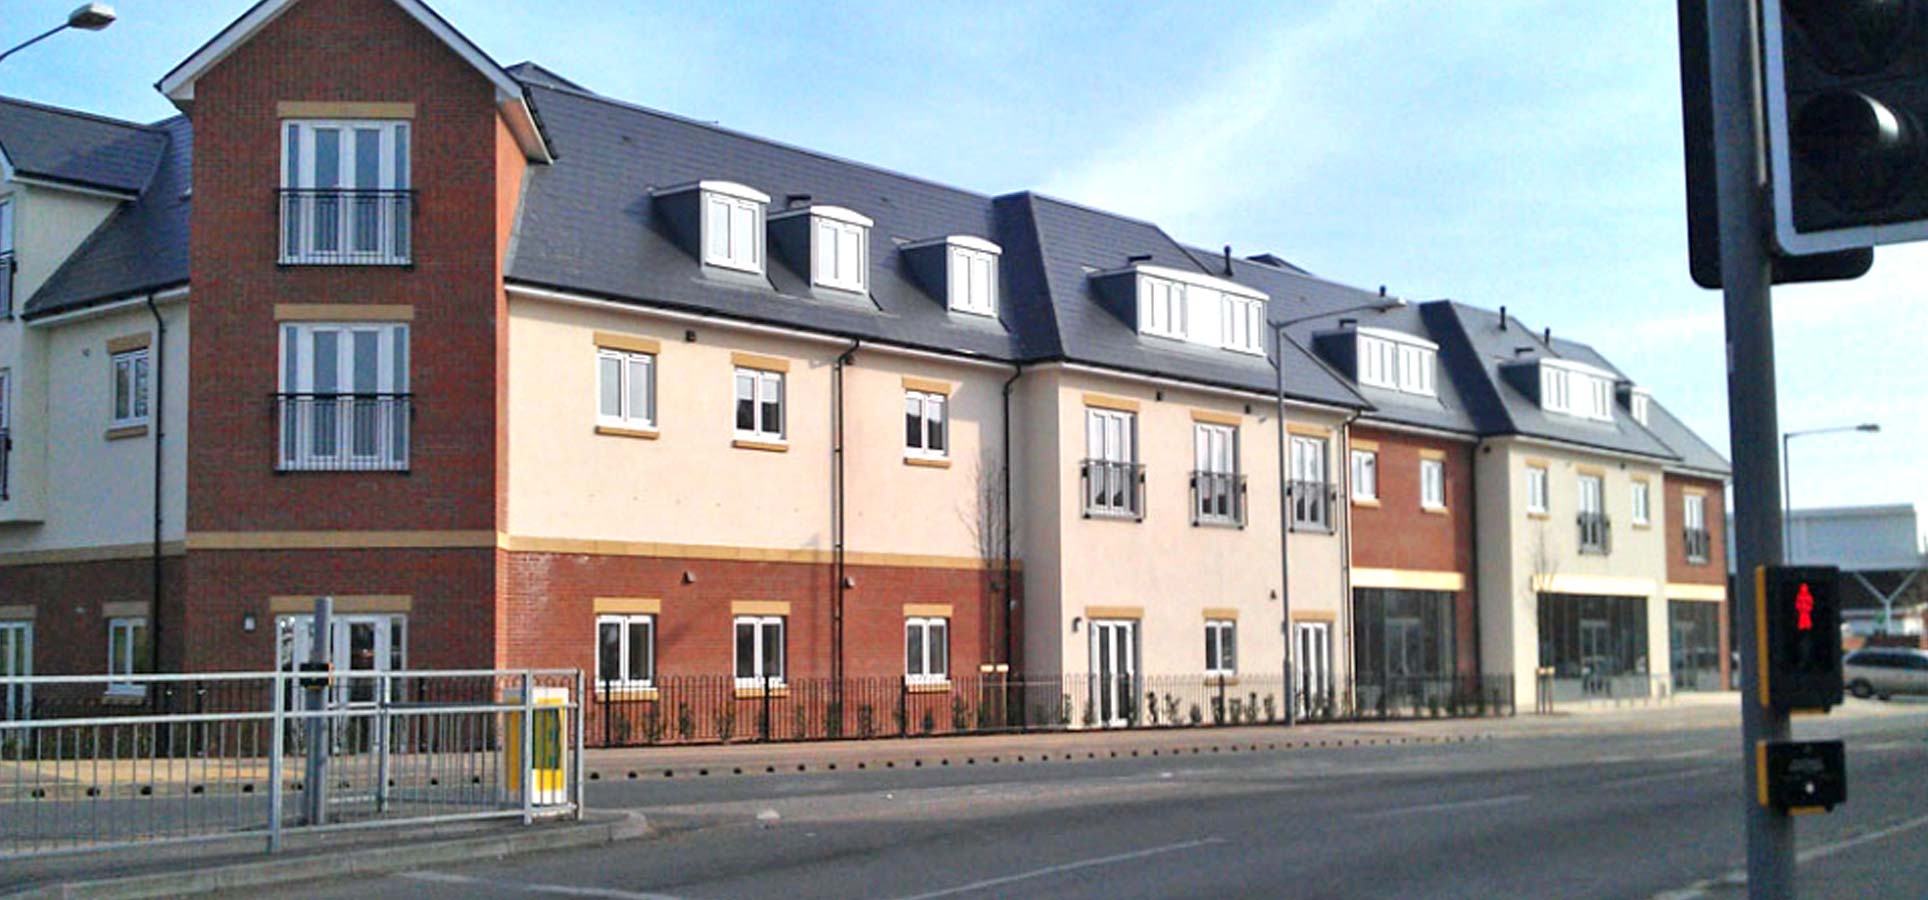 Apartments & Retail Units, Rayleigh, Jessops Construction Ltd